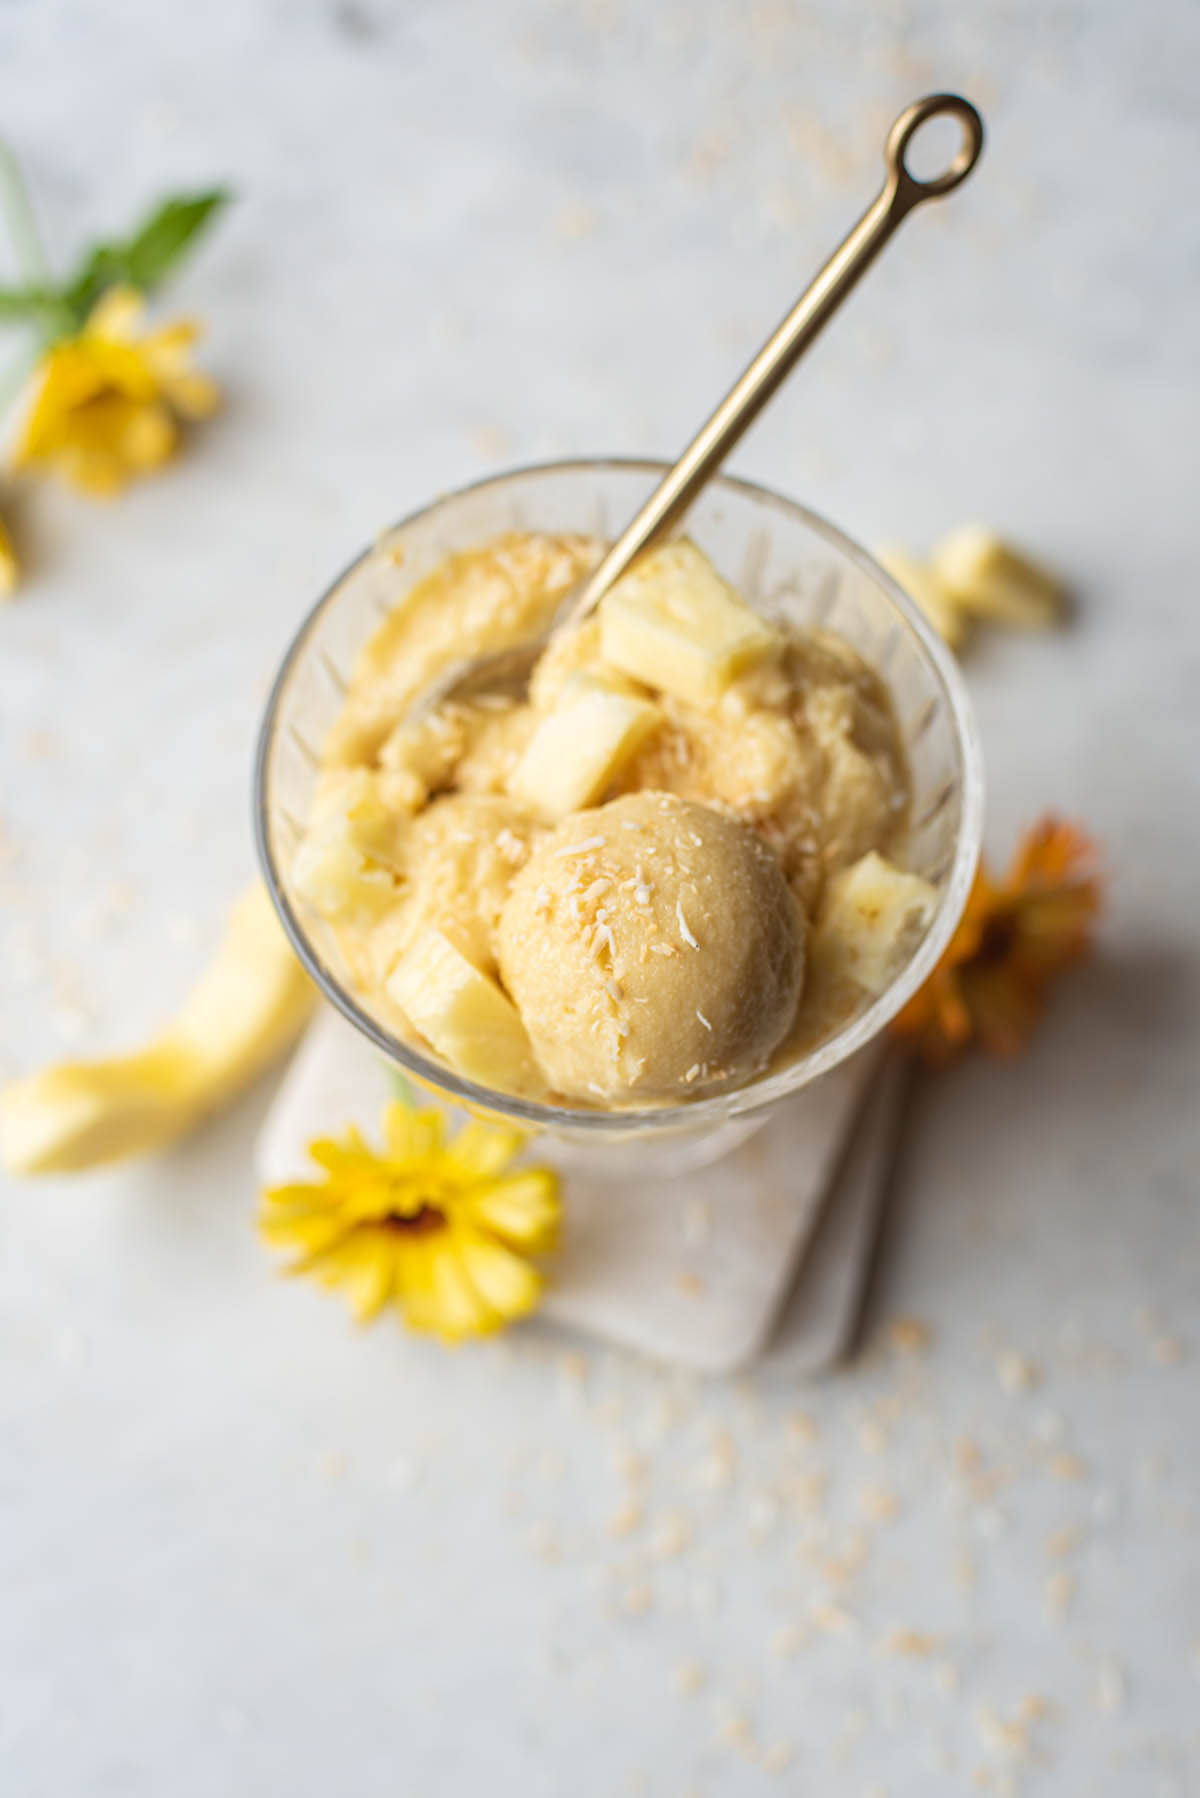 A dish of ice cream with a gold spoon and yellow flowers.